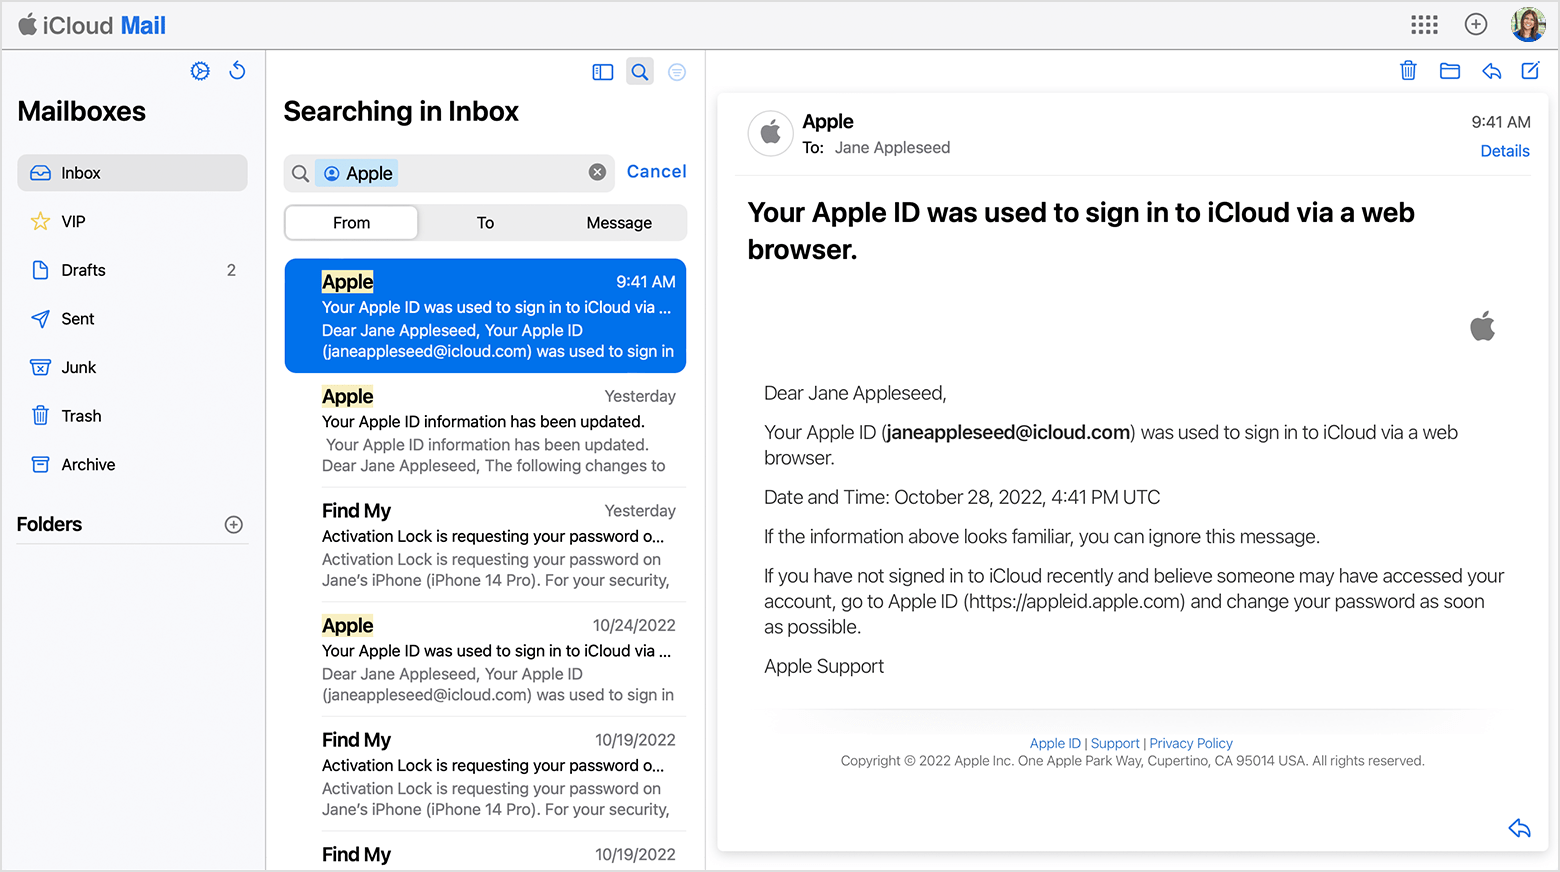 Find your Apple ID email address by searching for emails from Apple